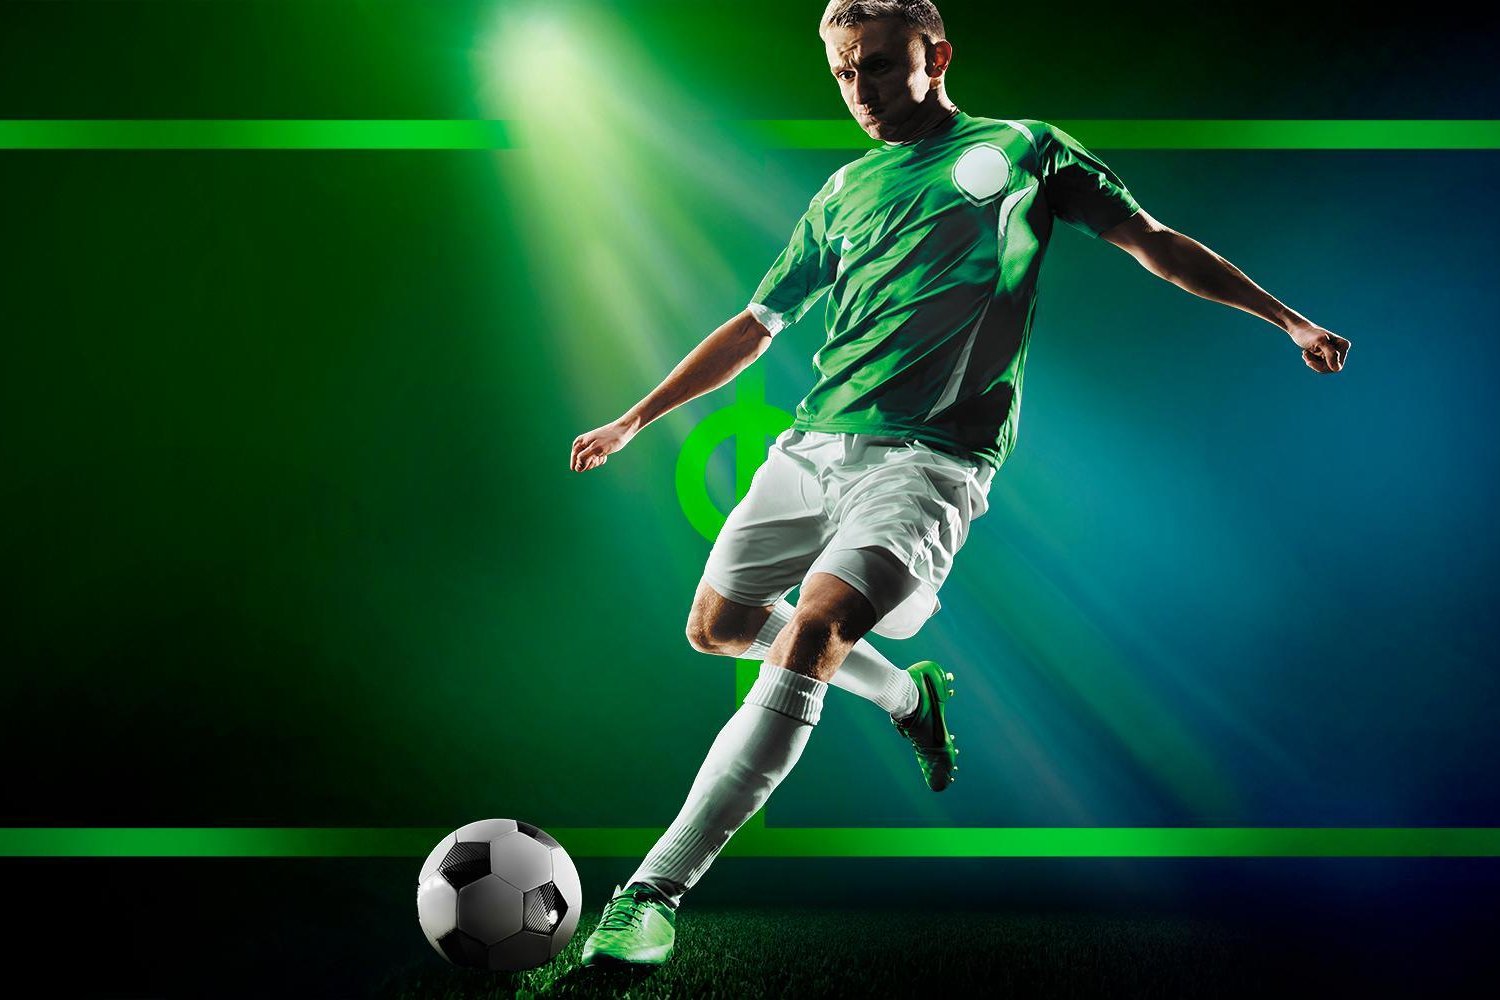 Famous Official Online Soccer Gambling Sites Offer the Most Popular Betting Markets